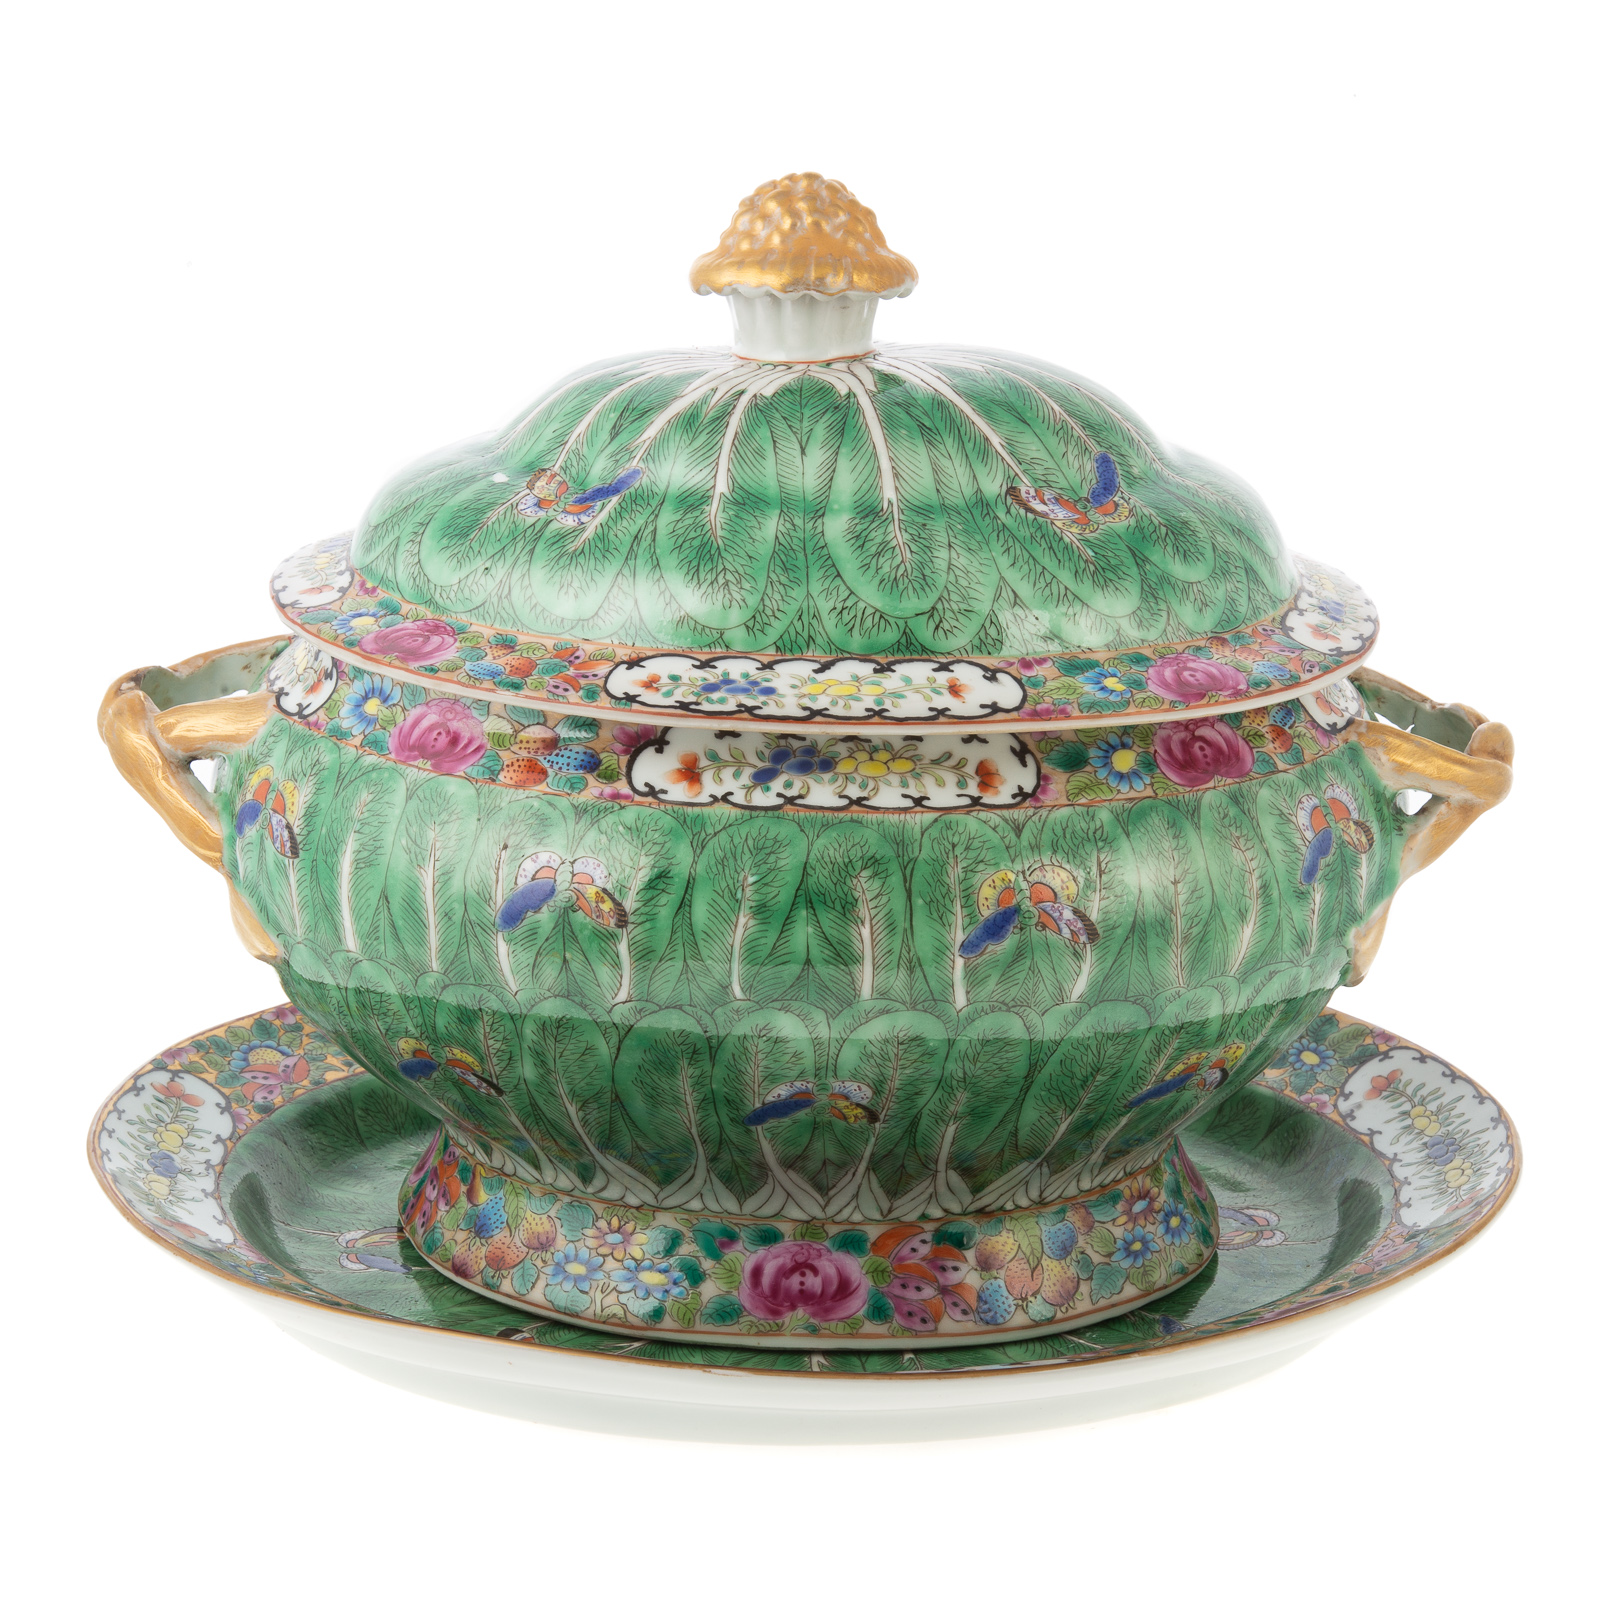 CHINESE EXPORT BOK CHOY SOUP TUREEN 36ab30